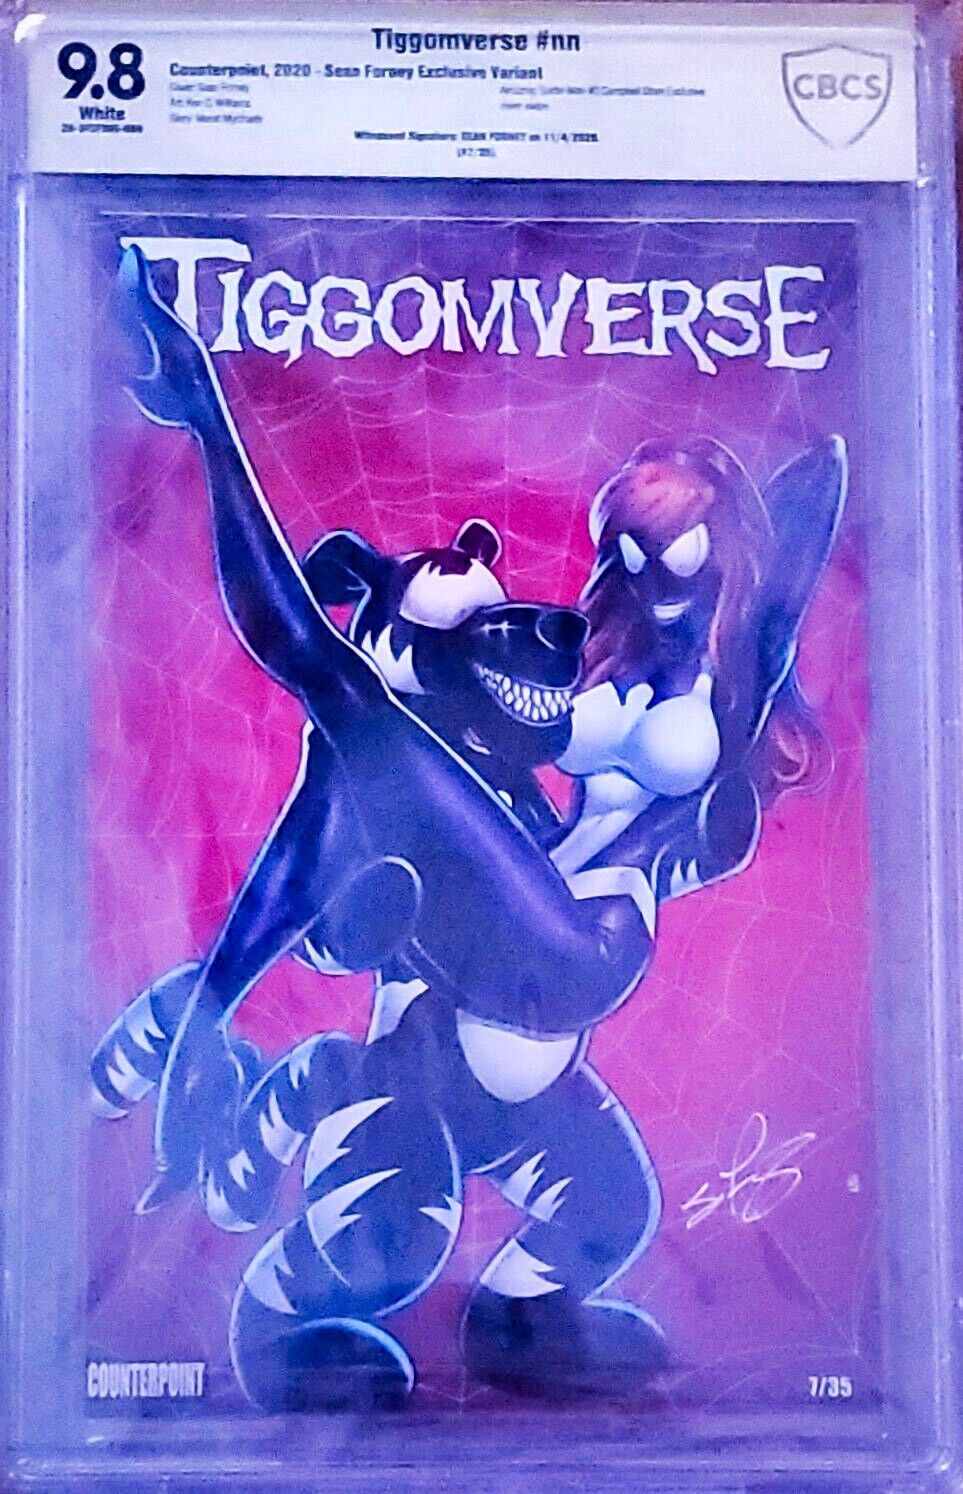 Tiggomverse CBCS Graded 9.8 Signed by Sean Forney ASM 2 Cover Homage 7/35